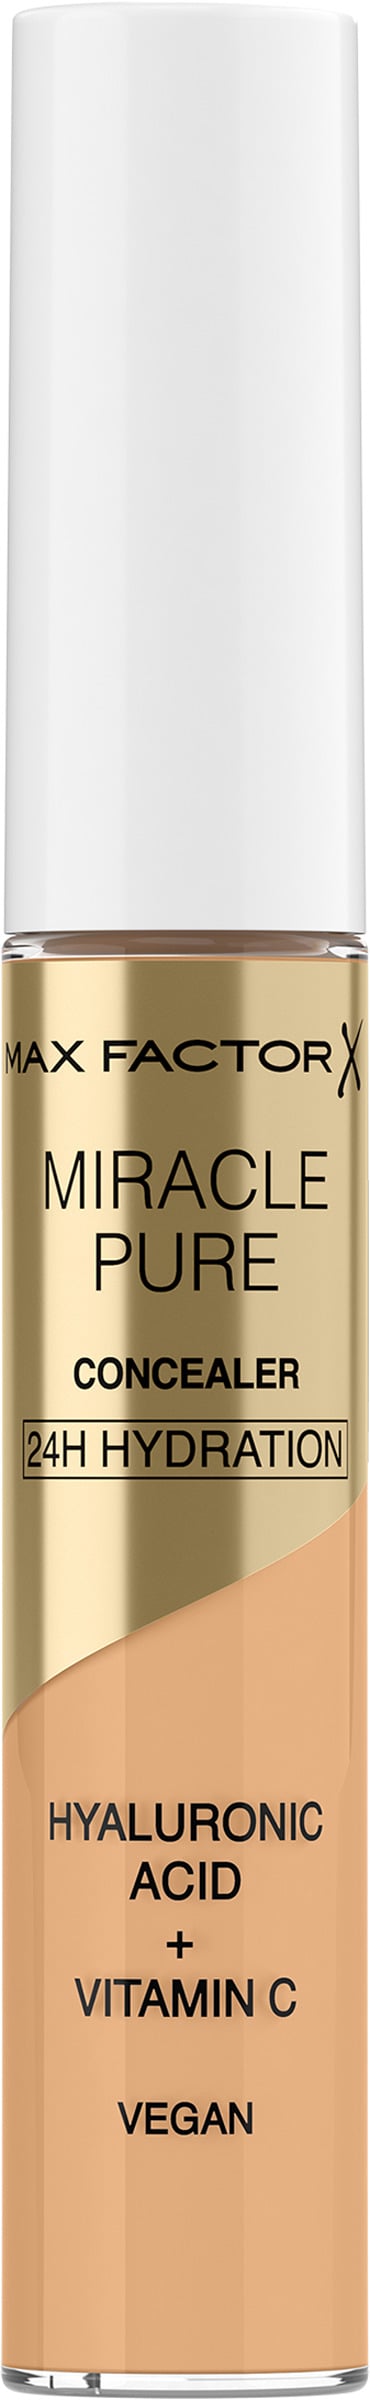 Max Factor Miracle Pure Concealer 02 Light 8 ml